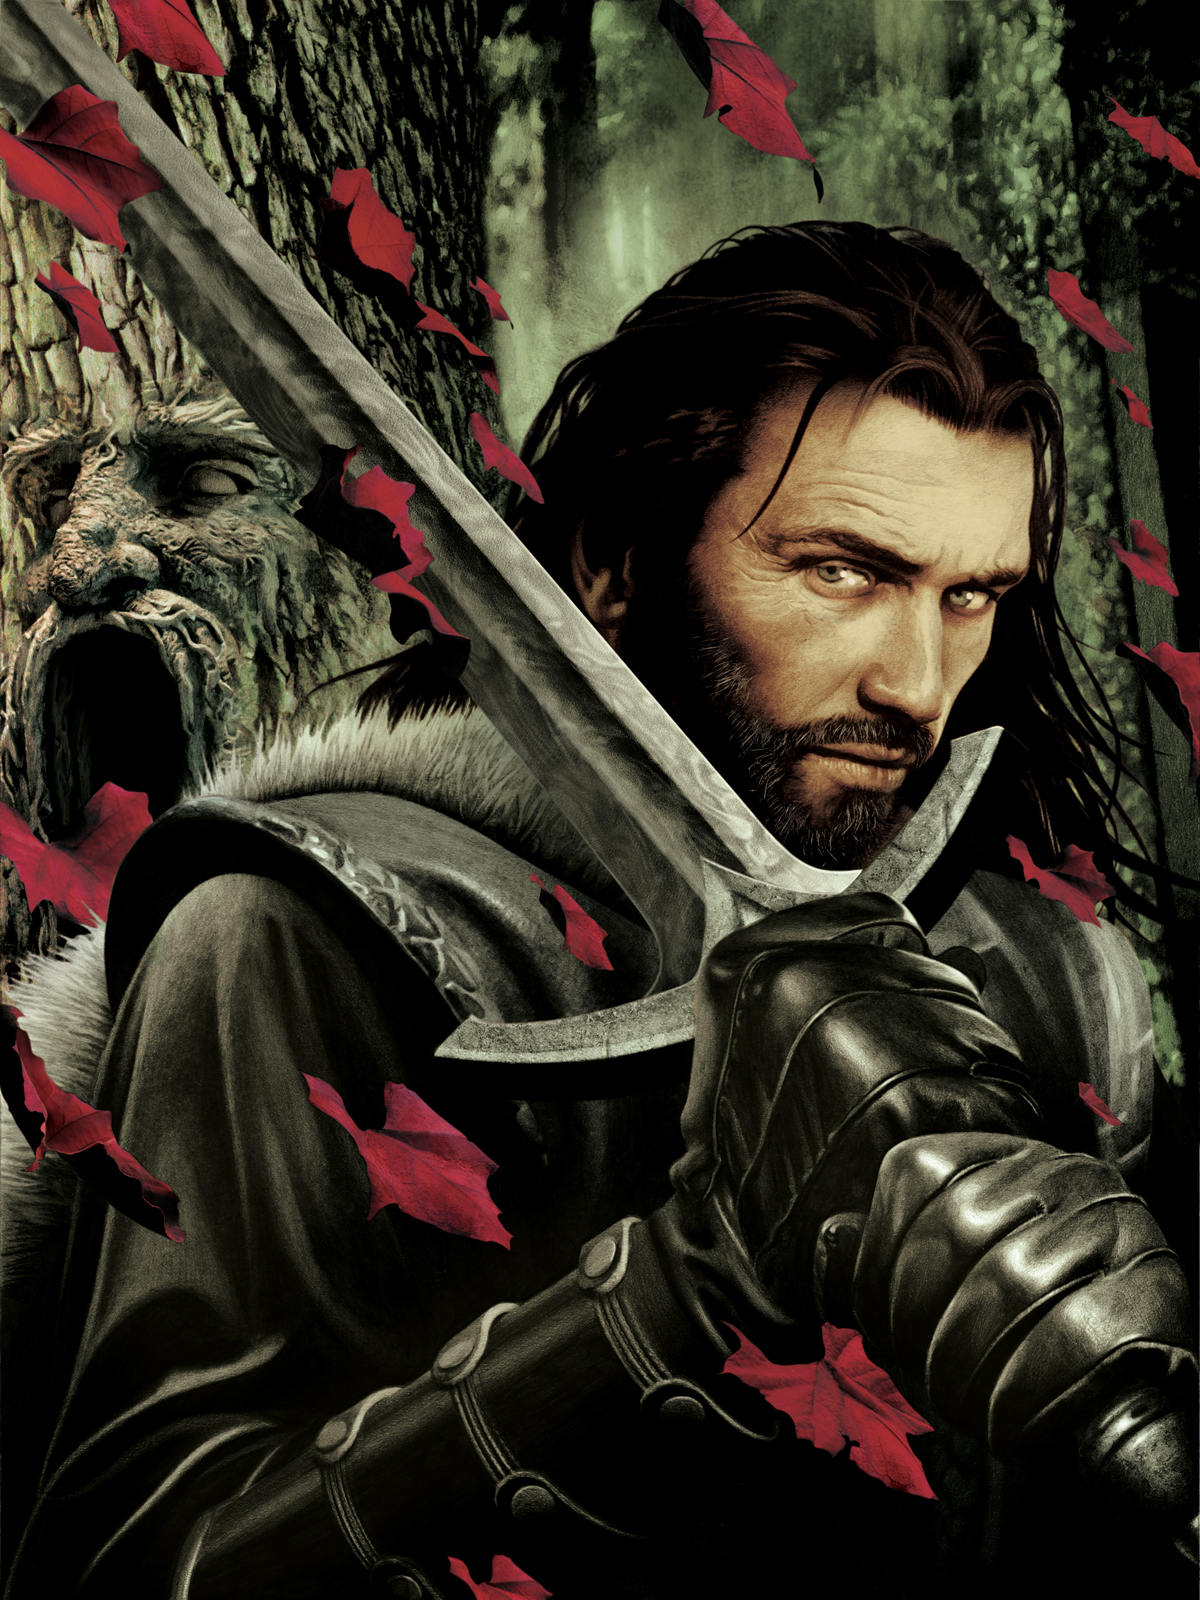 Fantasy Artist John Picacio On Bringing Iconic Game Of Thrones Characters To Life